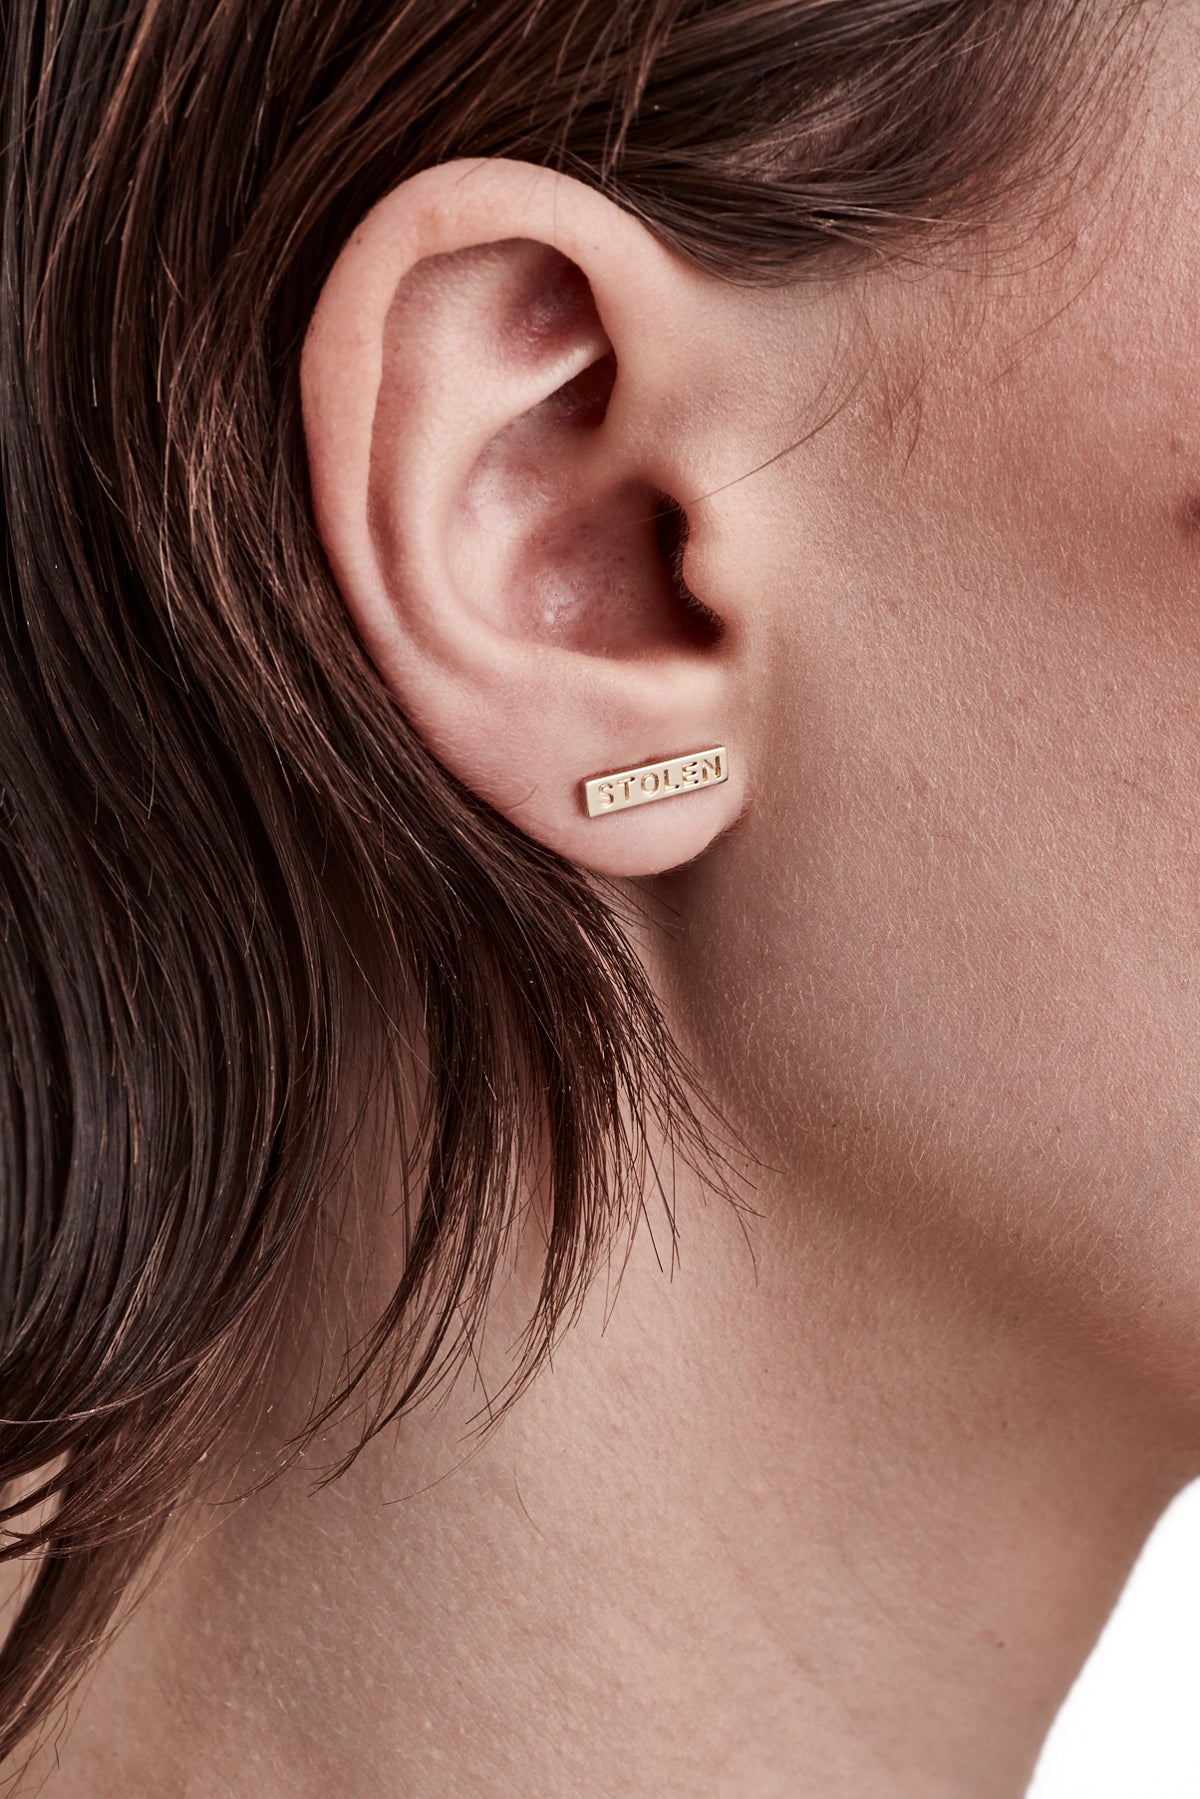   STOLEN GIRLFRIENDS CLUB TINY STOLEN BAR EARRINGS  The Stolen Girlfriends Club Stolen Bar Earrings are the perfect gift for a Stolen fan. They are a stud earring with a 1.3cm gold plated bar featuring the words "STOLEN" engraved on each.       Engraved "STOLEN"     18k Gold plated     Sold as a pair 